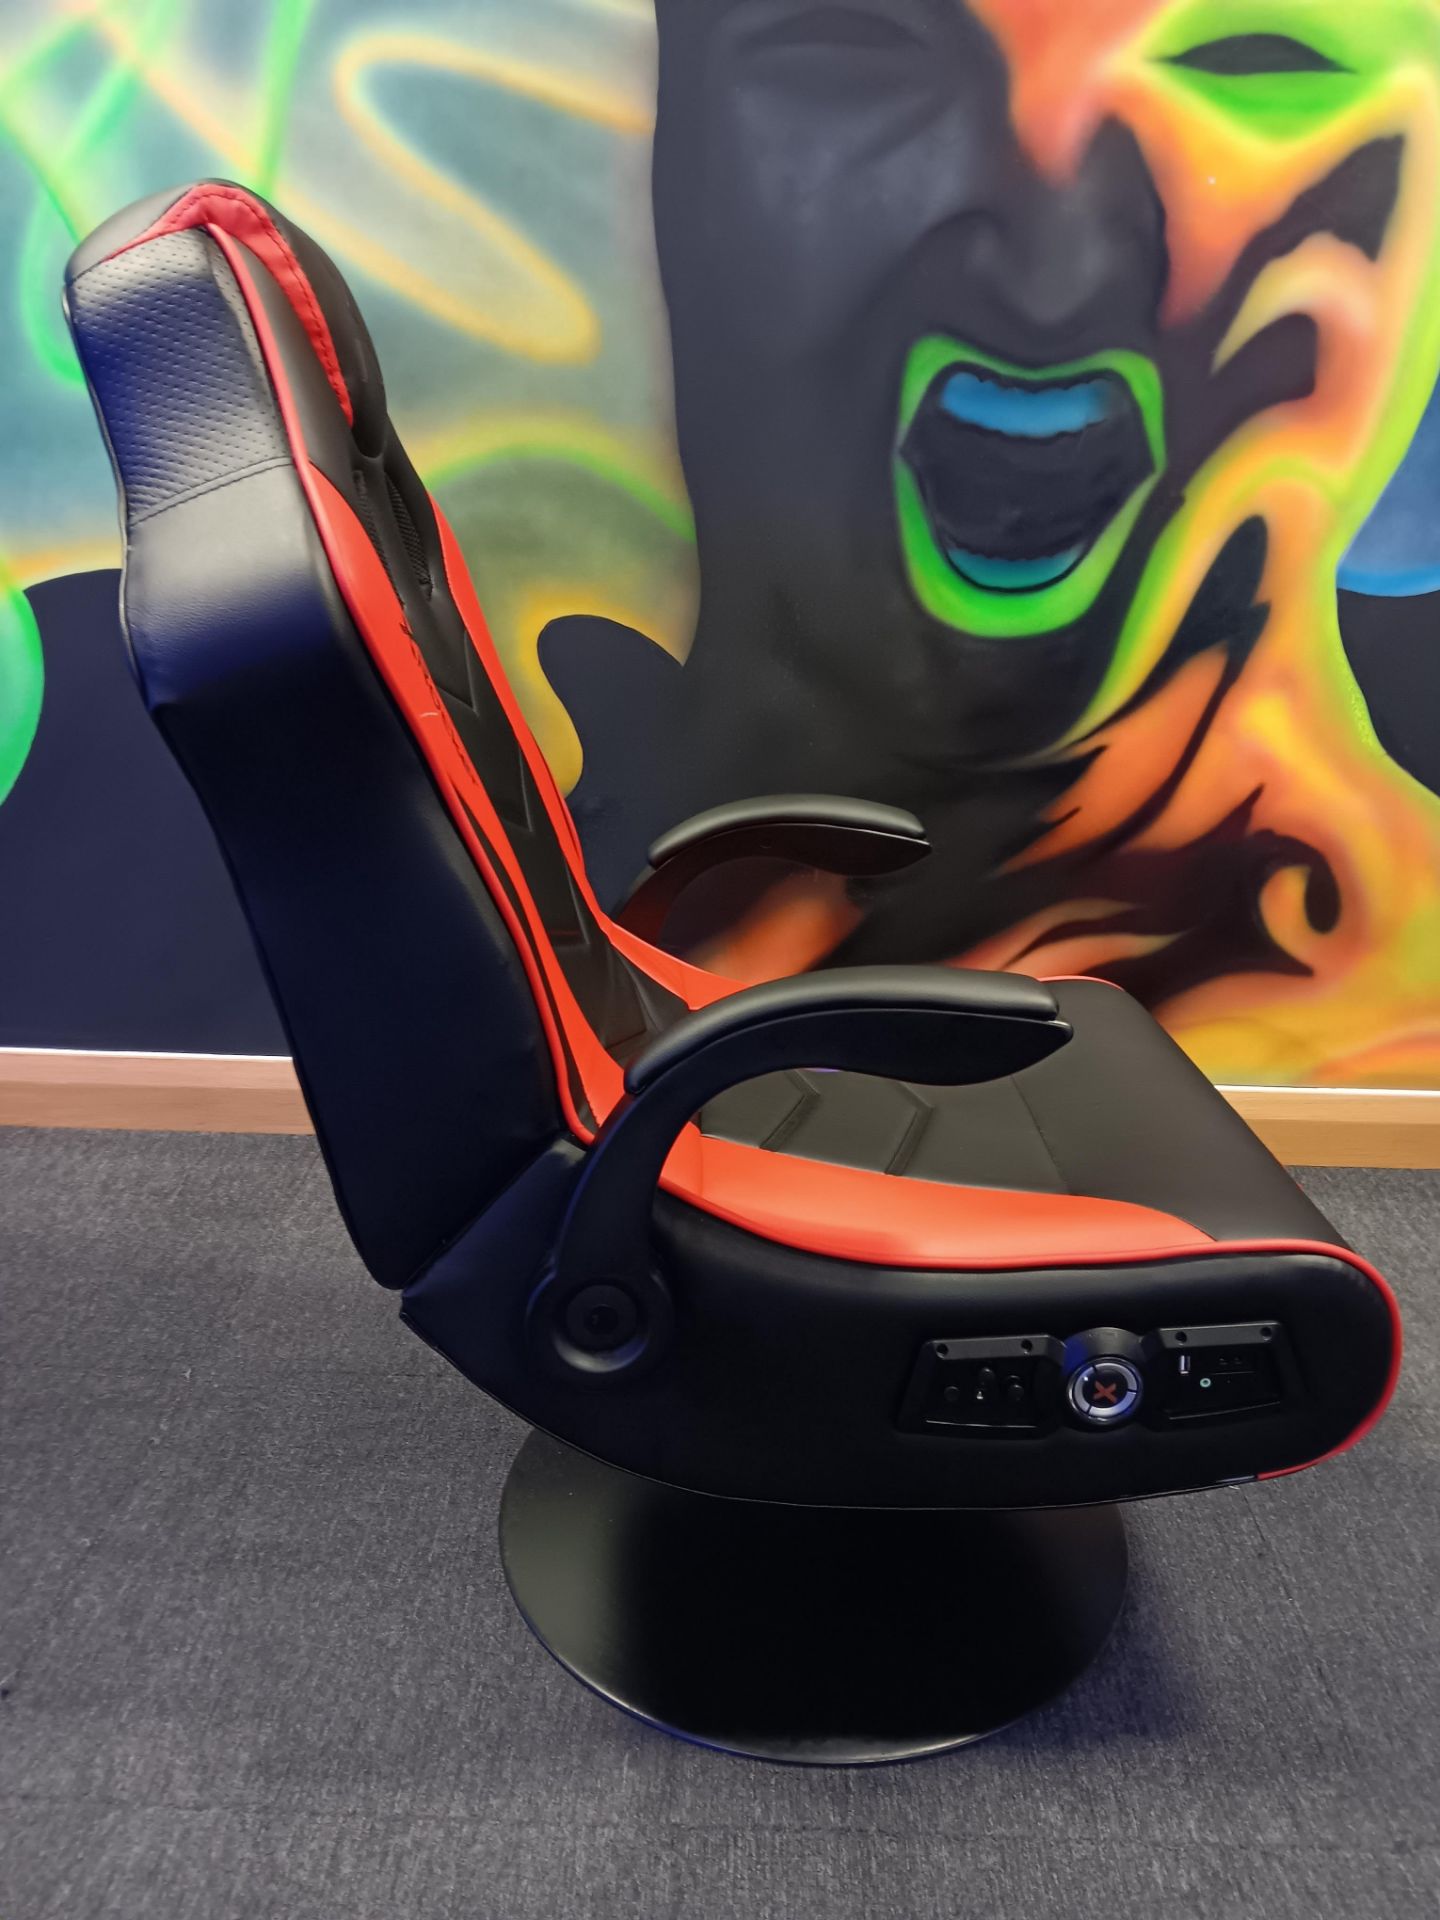 X Rocker Viper Wireless Gaming Chair - Image 2 of 4